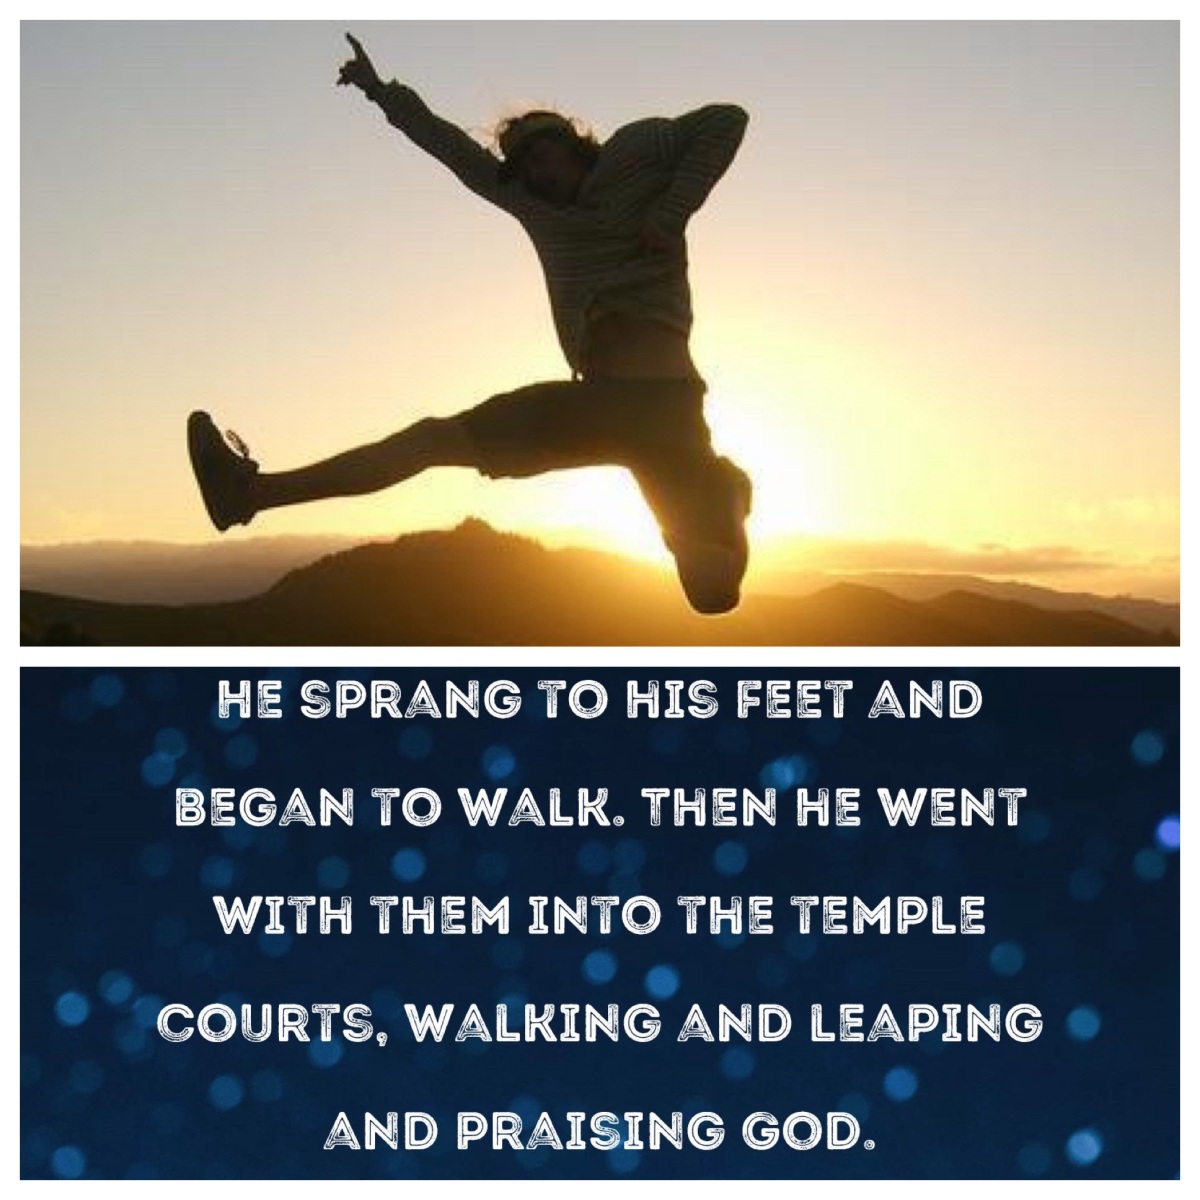 Walking and leaping and praising God (Acts 3; Narrative Lectionary for Easter 3)